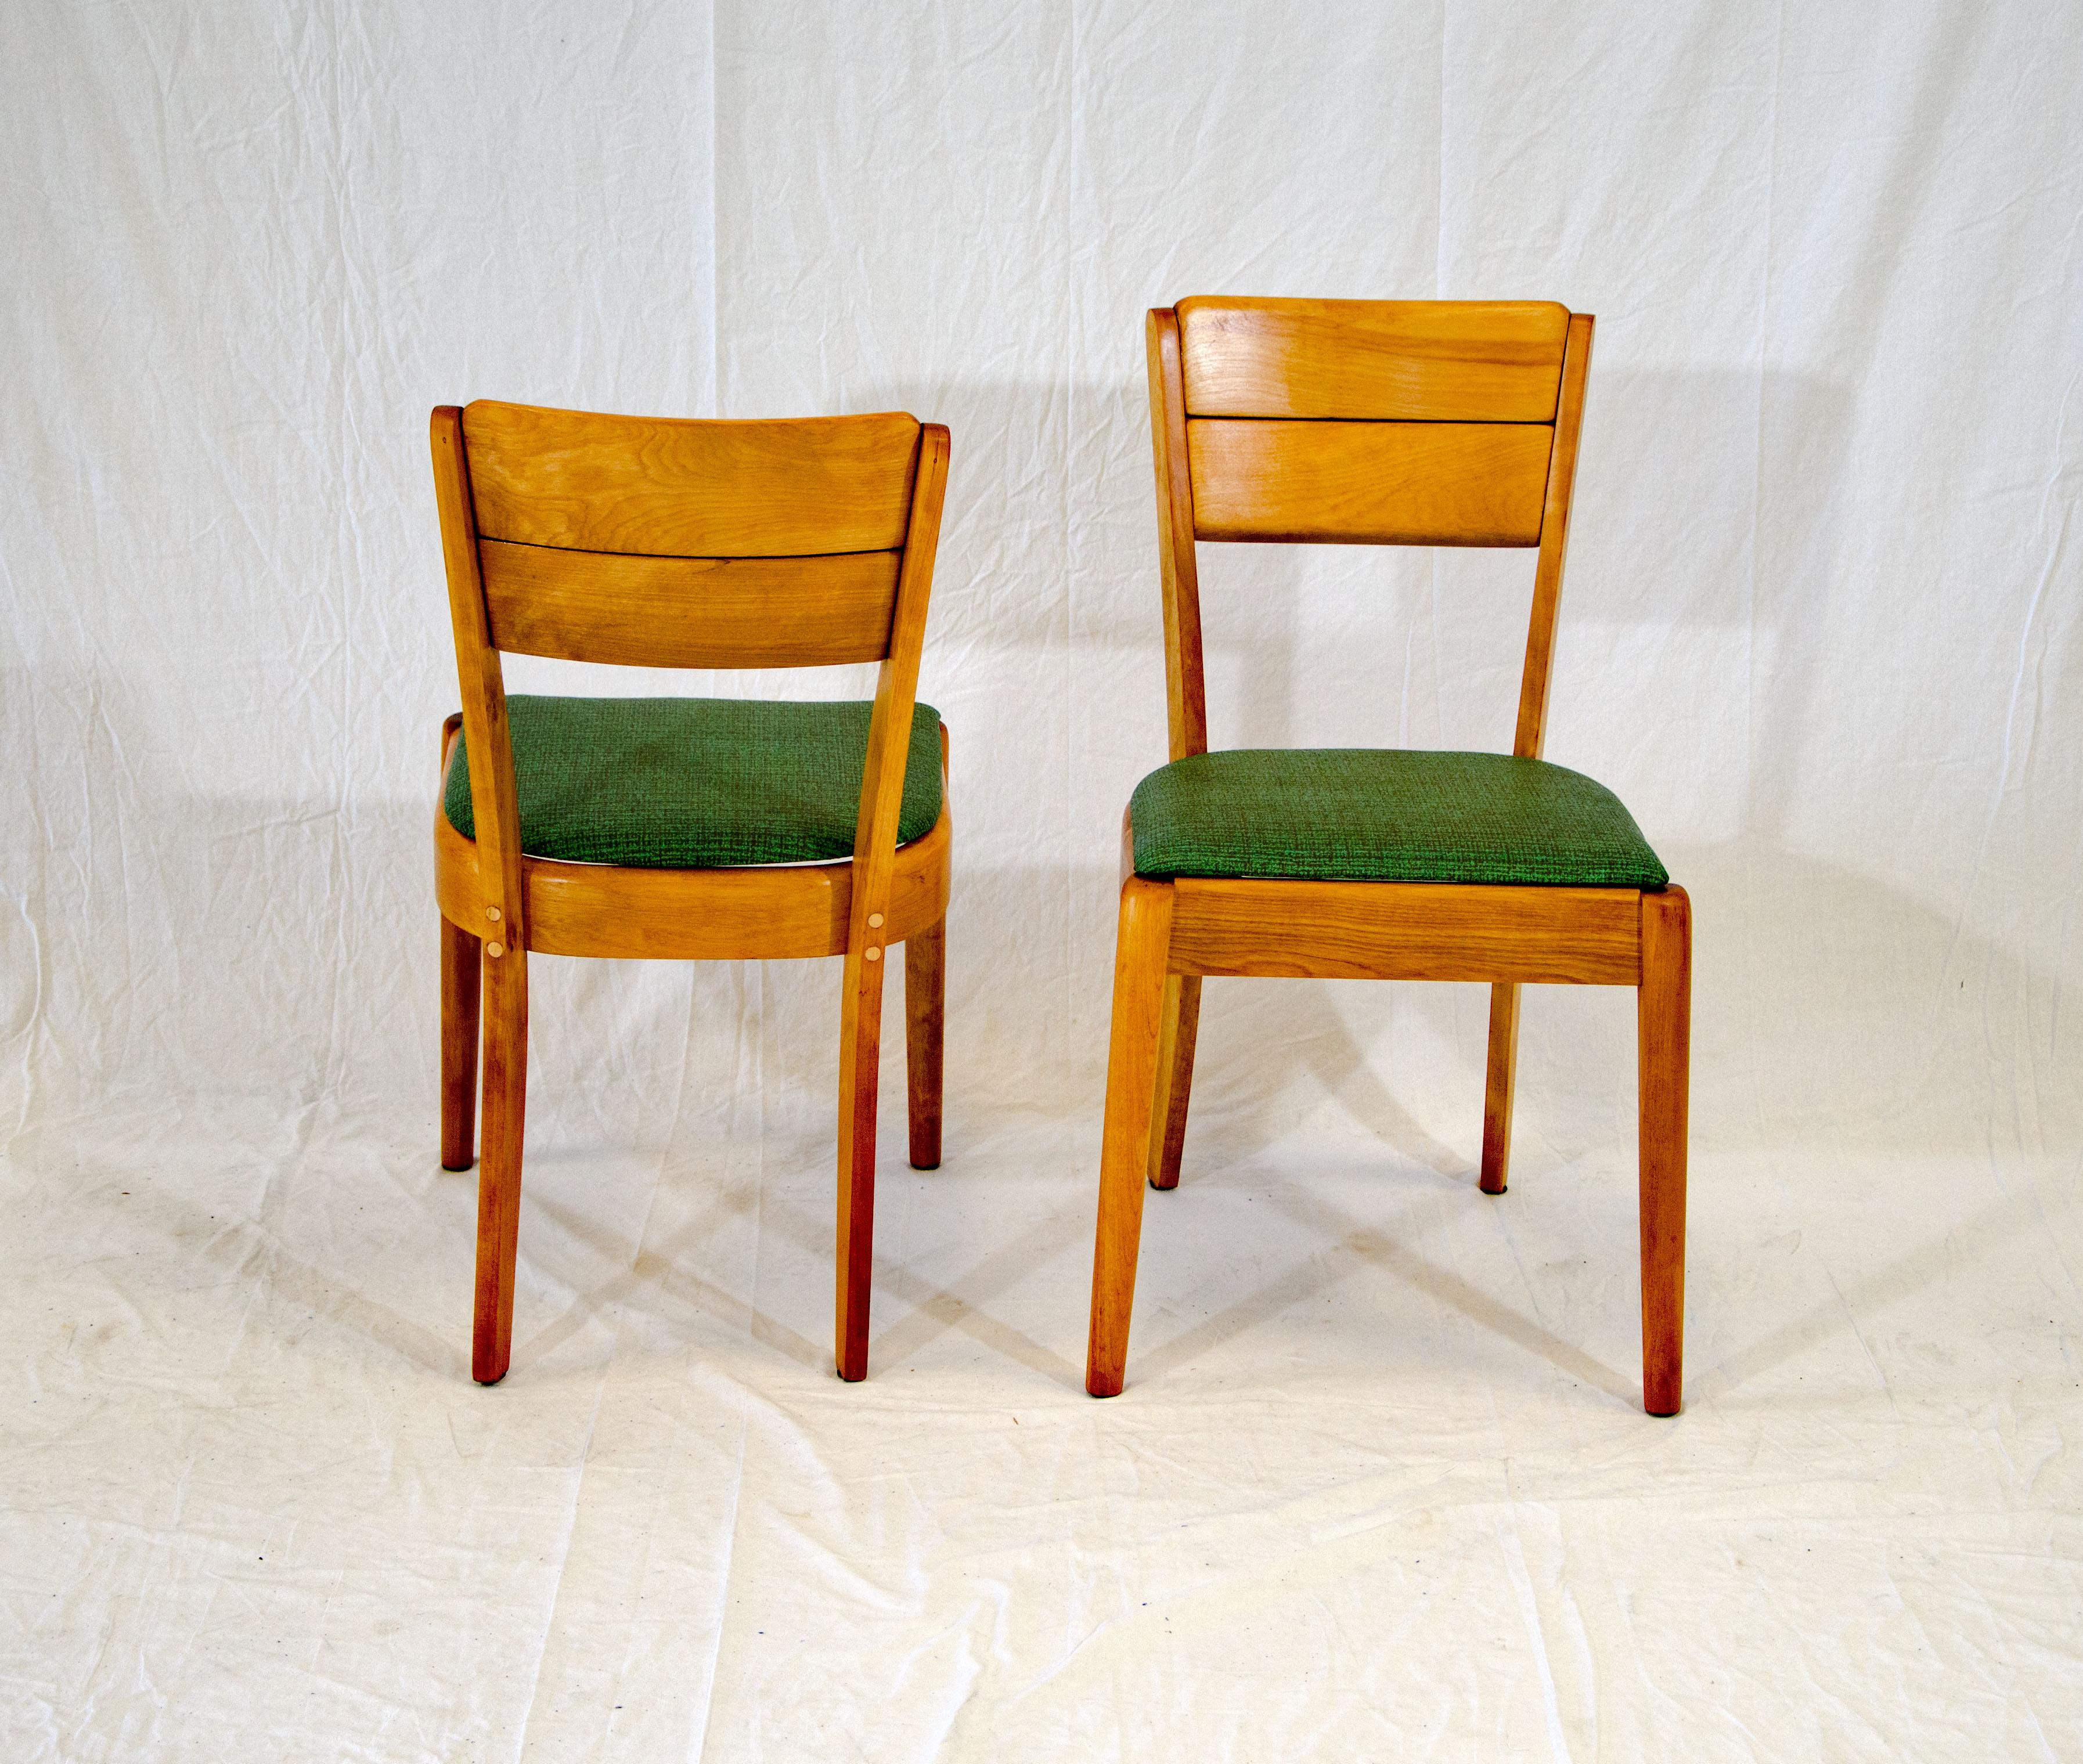 A pair of 1940s Heywood Wakefield dining chairs that would serve well at a small breakfast table or as desk chairs in a child's room. Produced from 1941-1944. The seats are easily detached to install different upholstery.